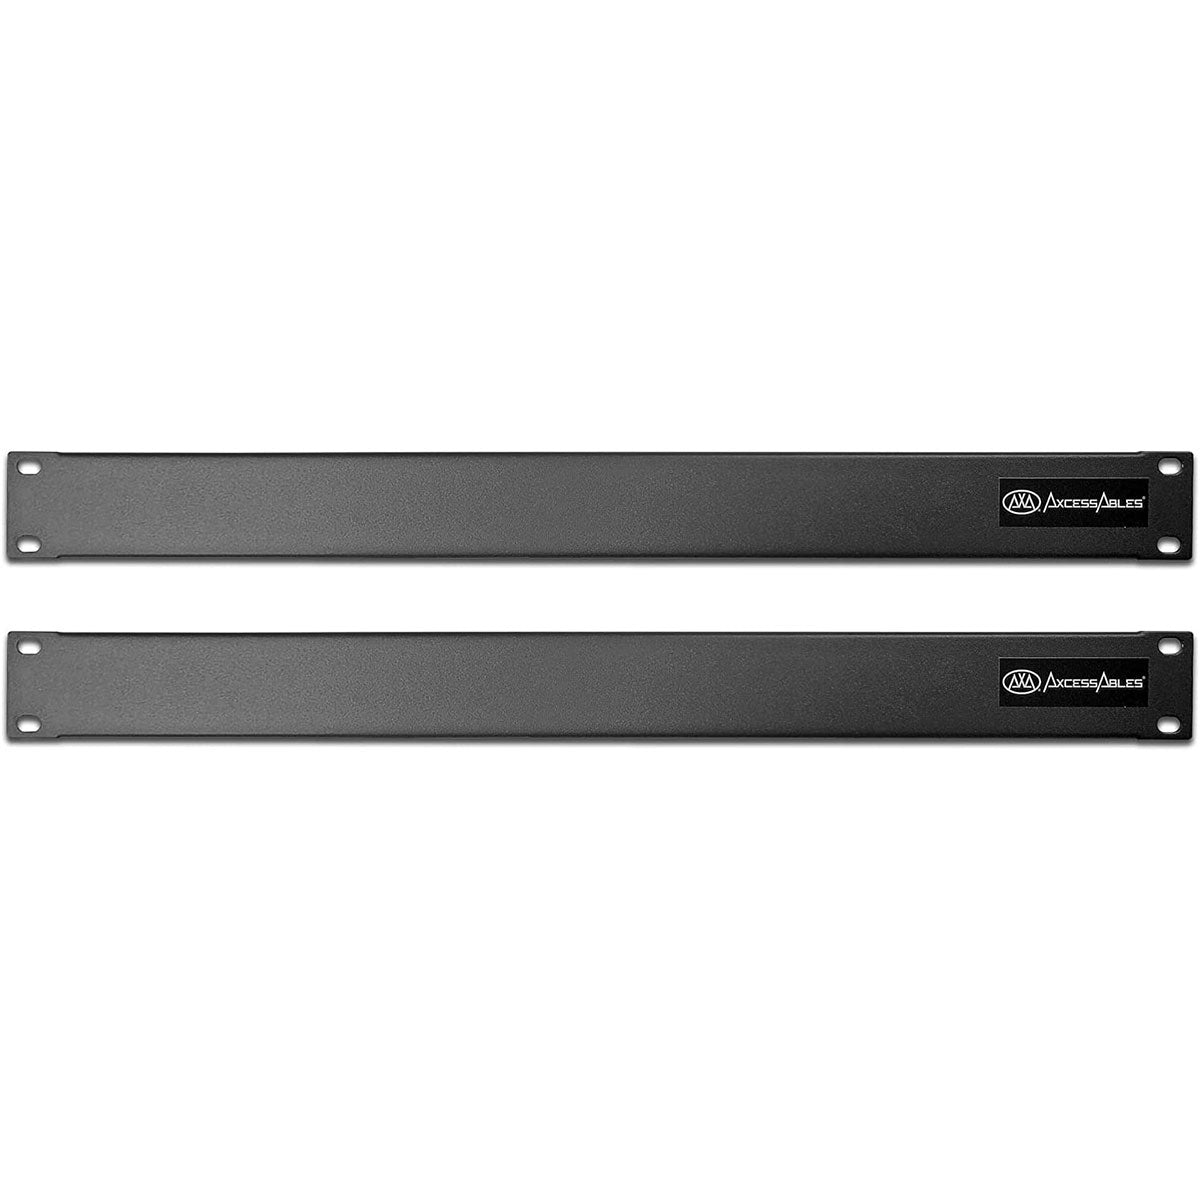 AxcessAbles 1U Blank Rack Panels for 19 Rack cabinets and Cases - 2 Pack | 1U Blank Rack Spacers | Compatible with Networking Rack, Studio Rack Cabinets| 1U Blank Panels (RKBLANK1U -2 Pack)